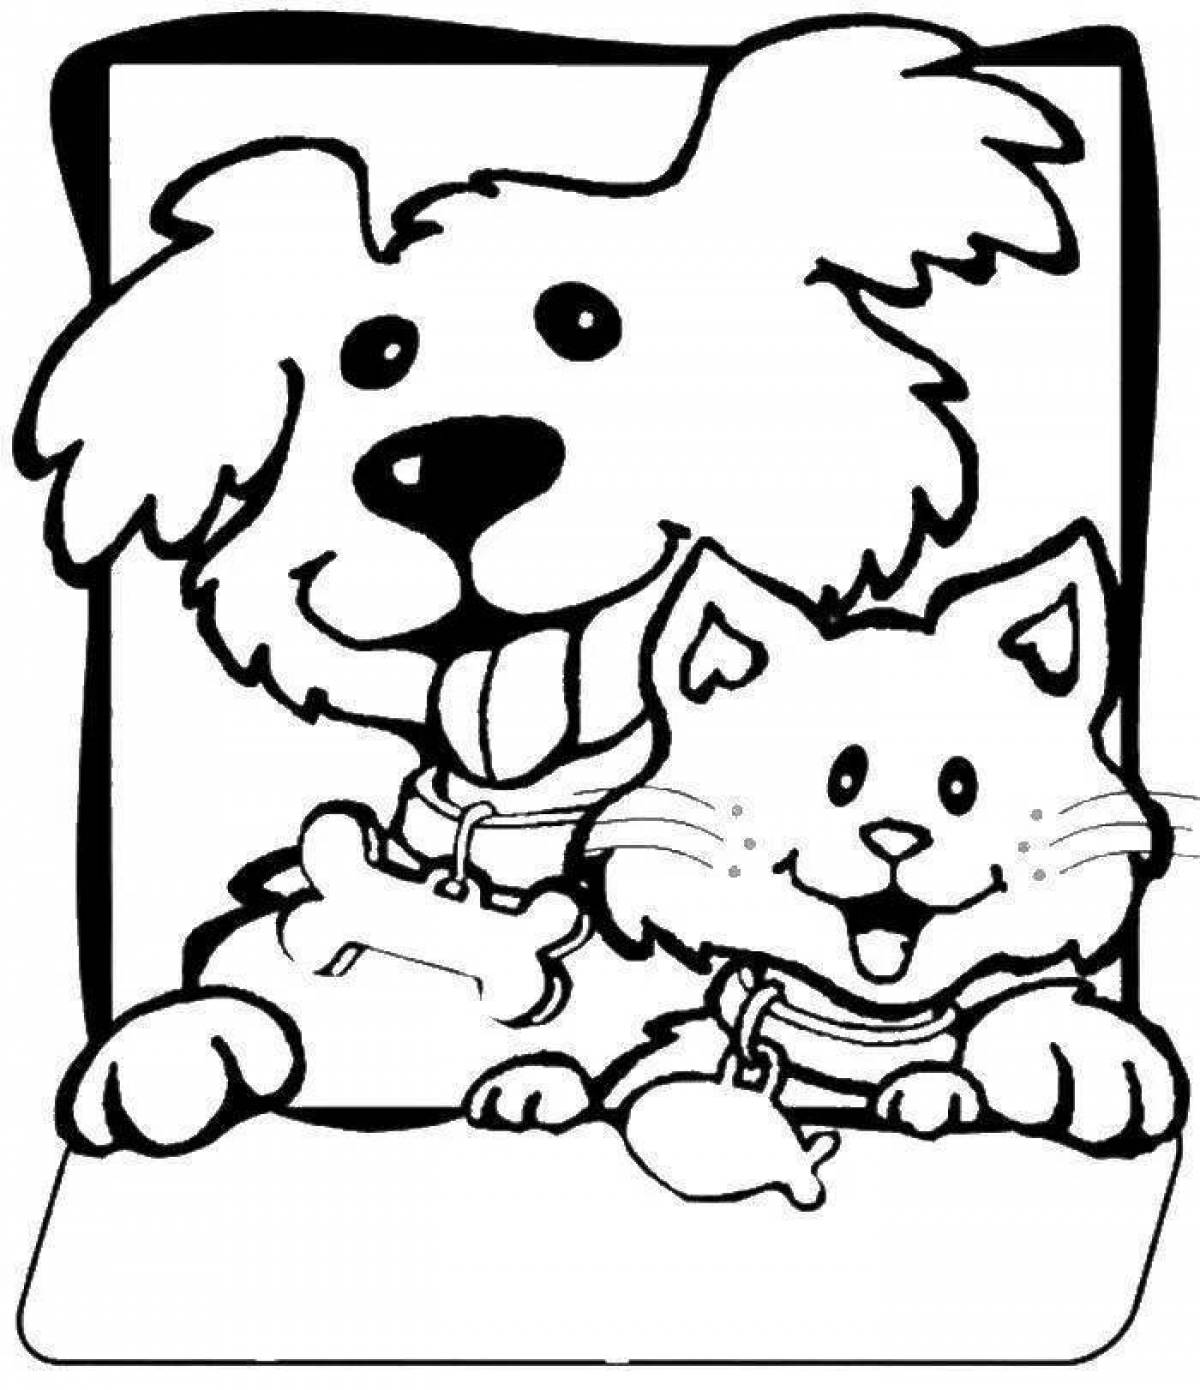 Coloring page adorable kittens and puppies